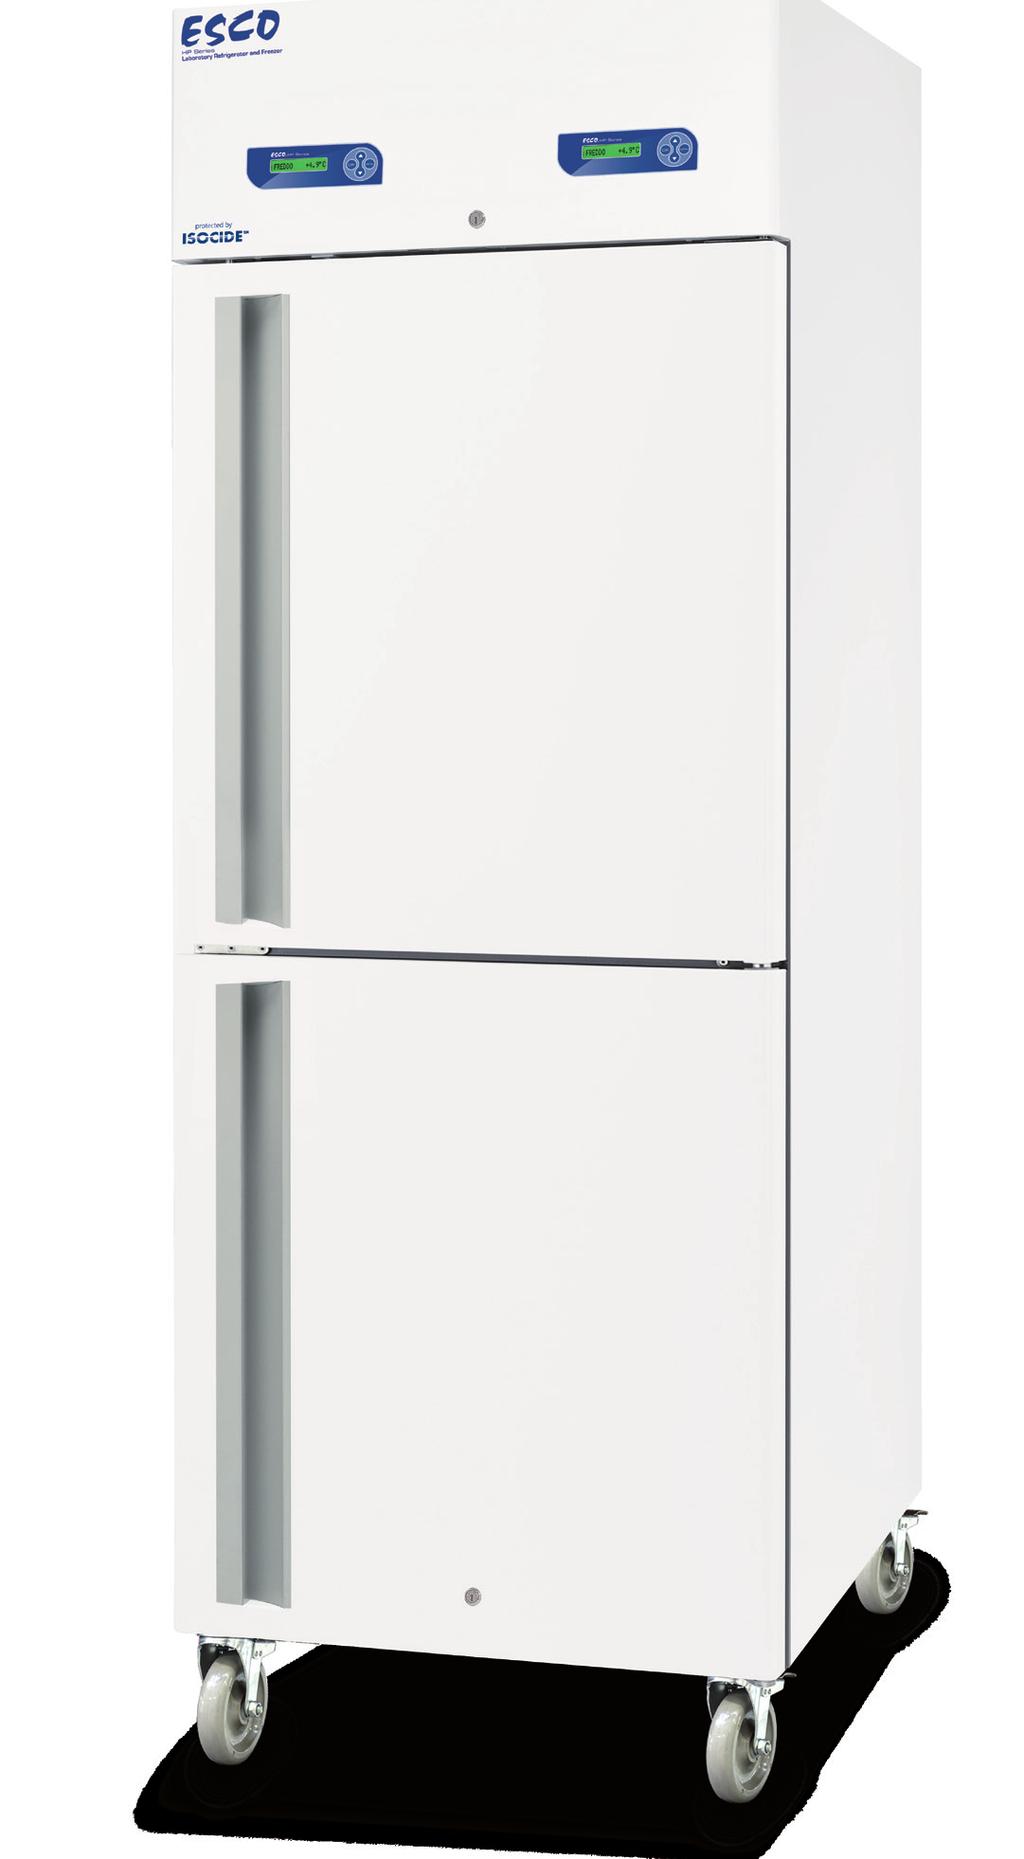 26 Combination Laboratory Refrigerator and Freezer Model: HC6-700S Door Lock Provides additional security for expensive samples and reagents from unauthorized users Displays data about the unit and